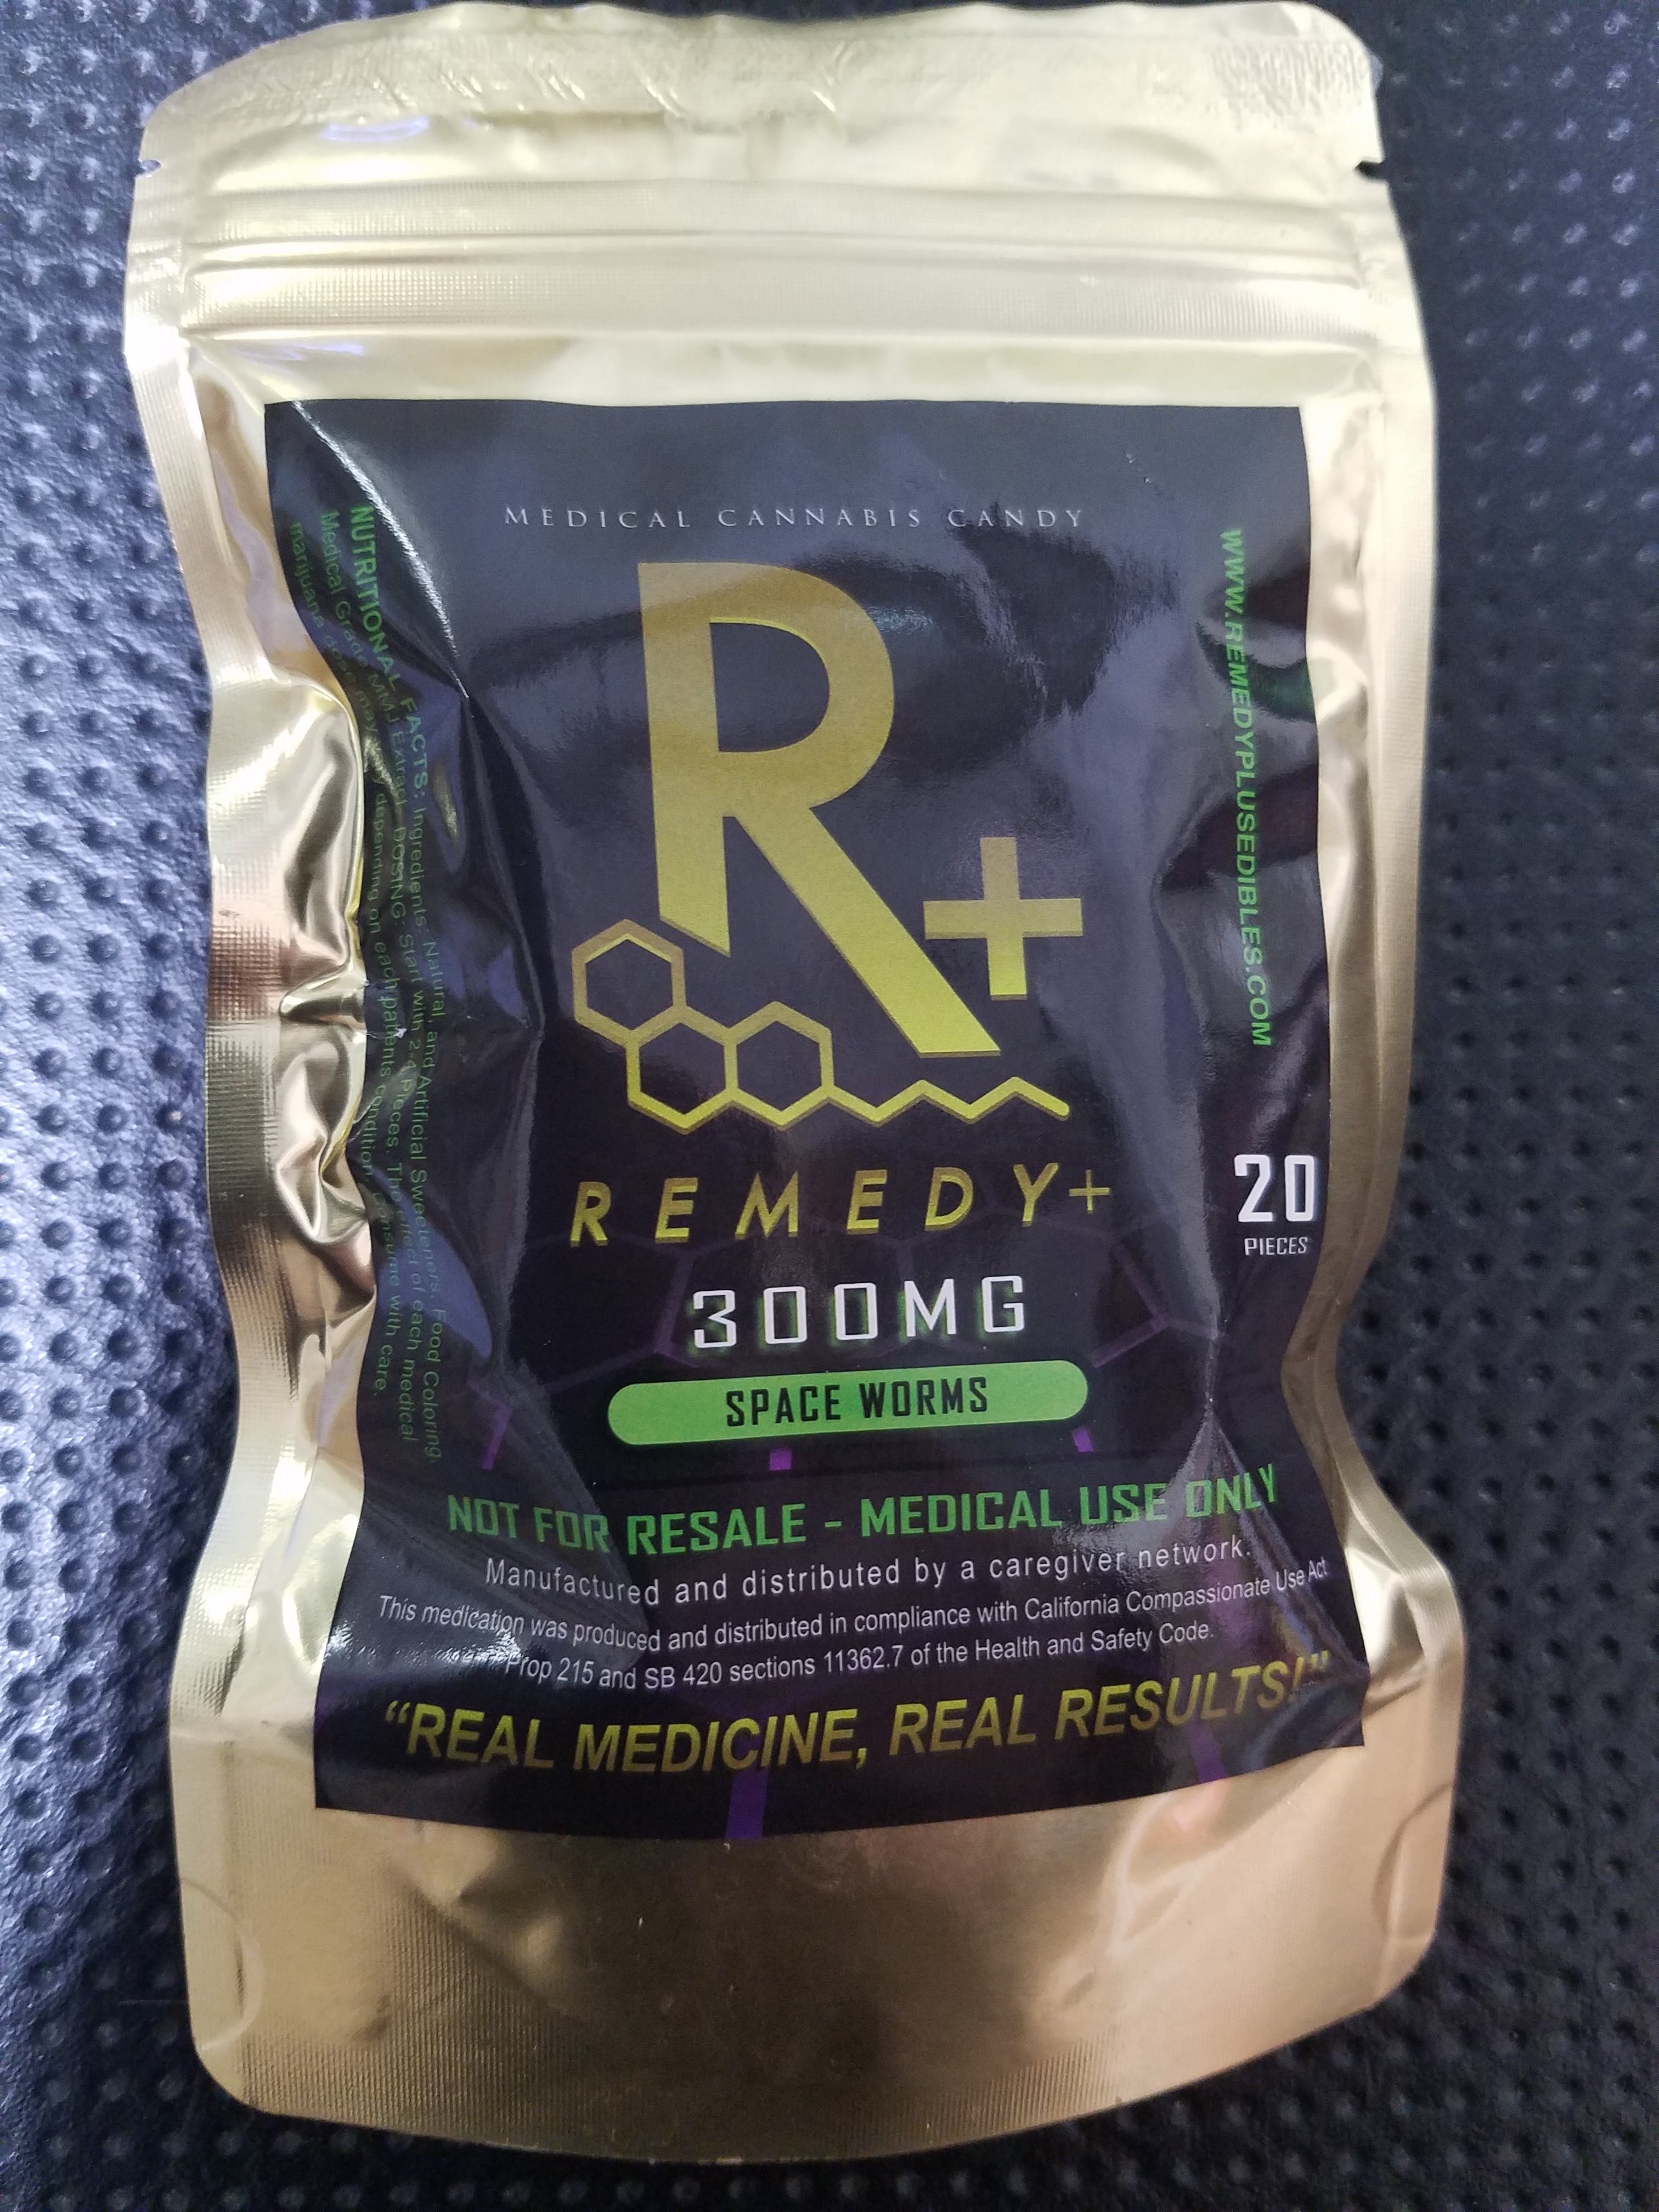 edible-remedy-plus-300mg-space-worms